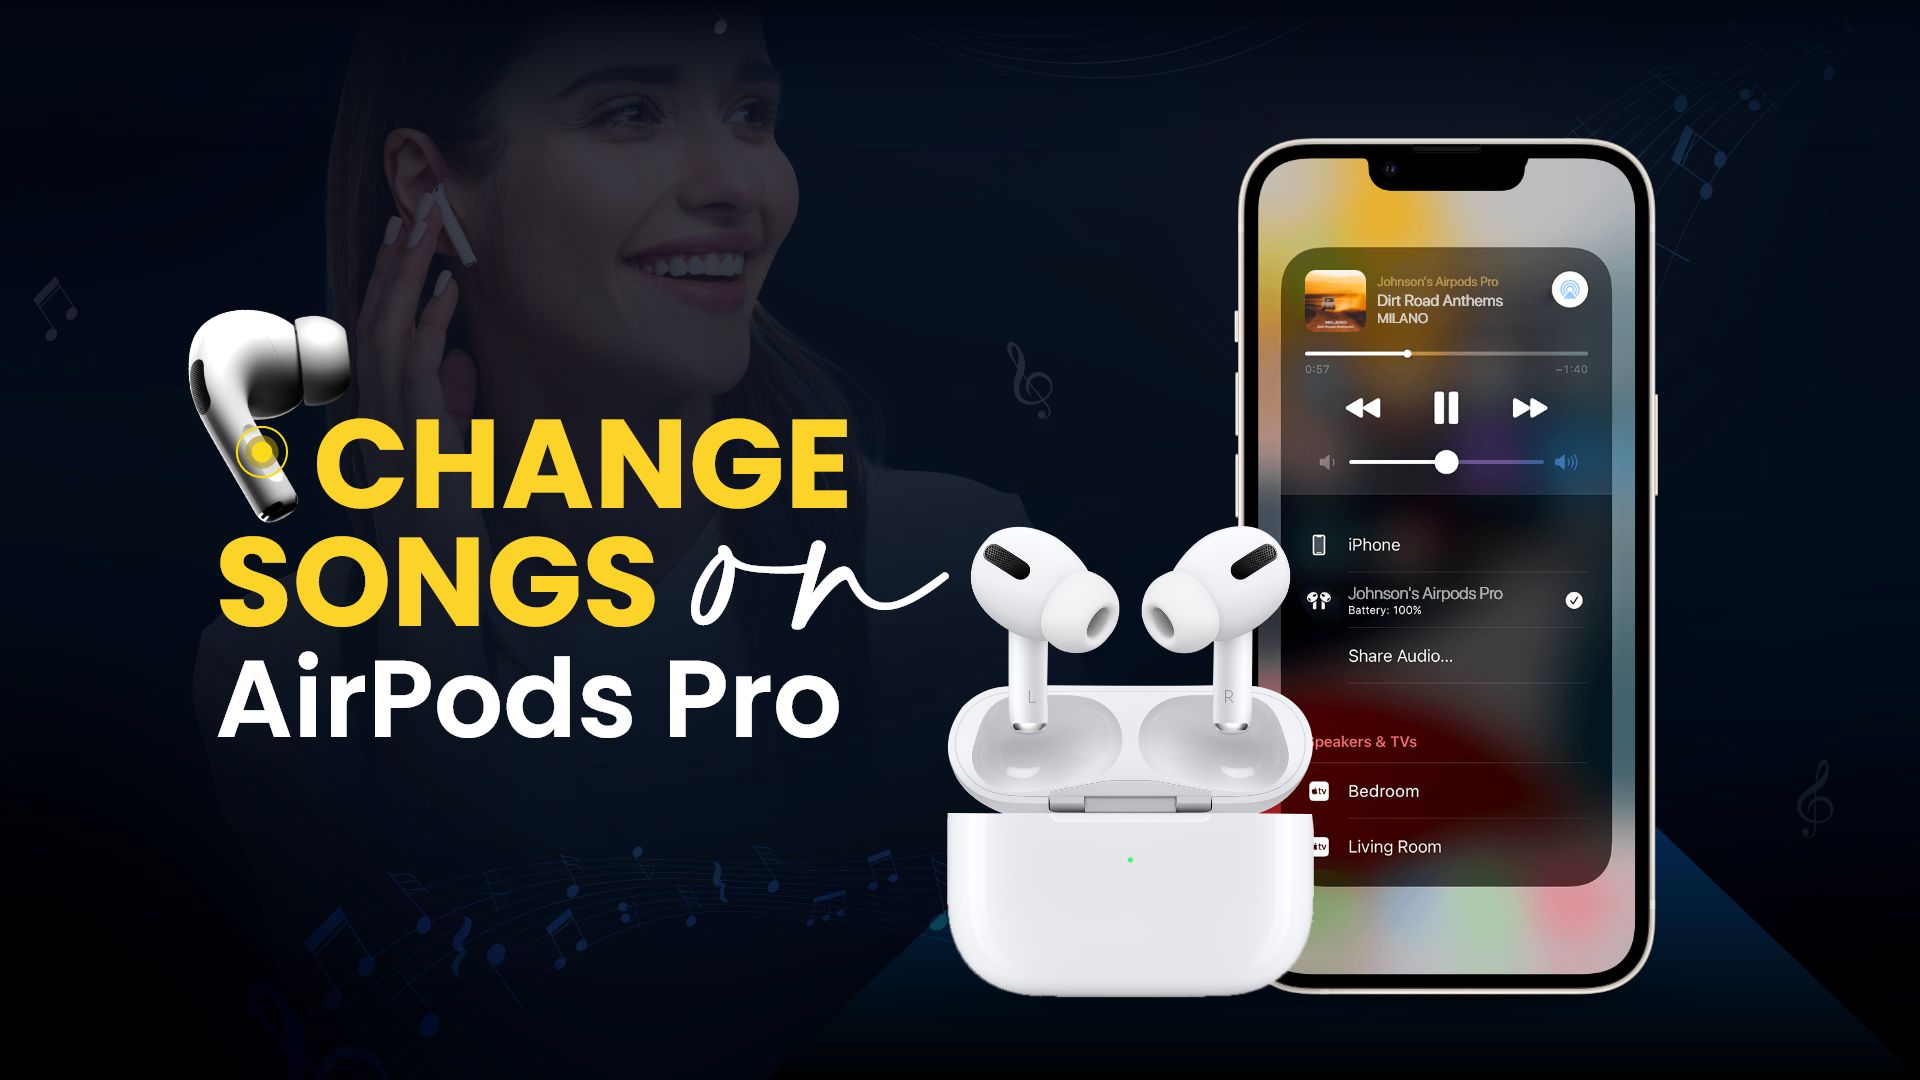 How to Change Songs on AirPods Pro